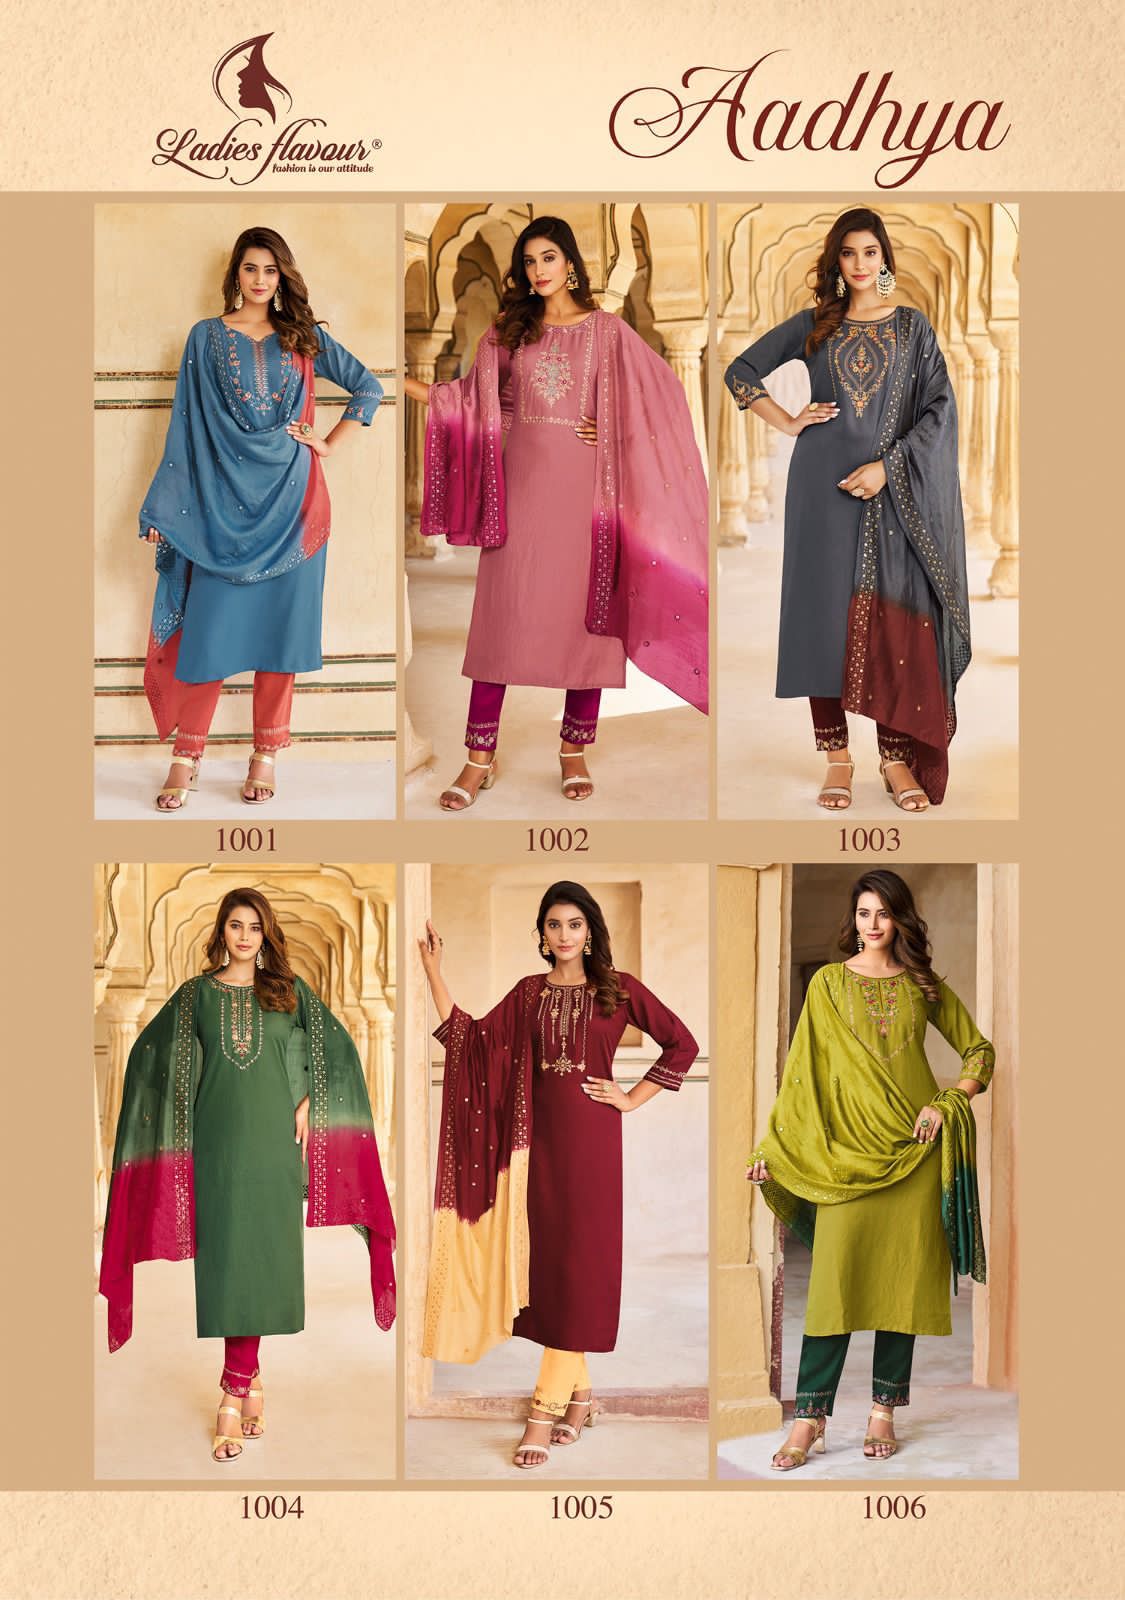 Ladies Flavour Aadhya collection 8